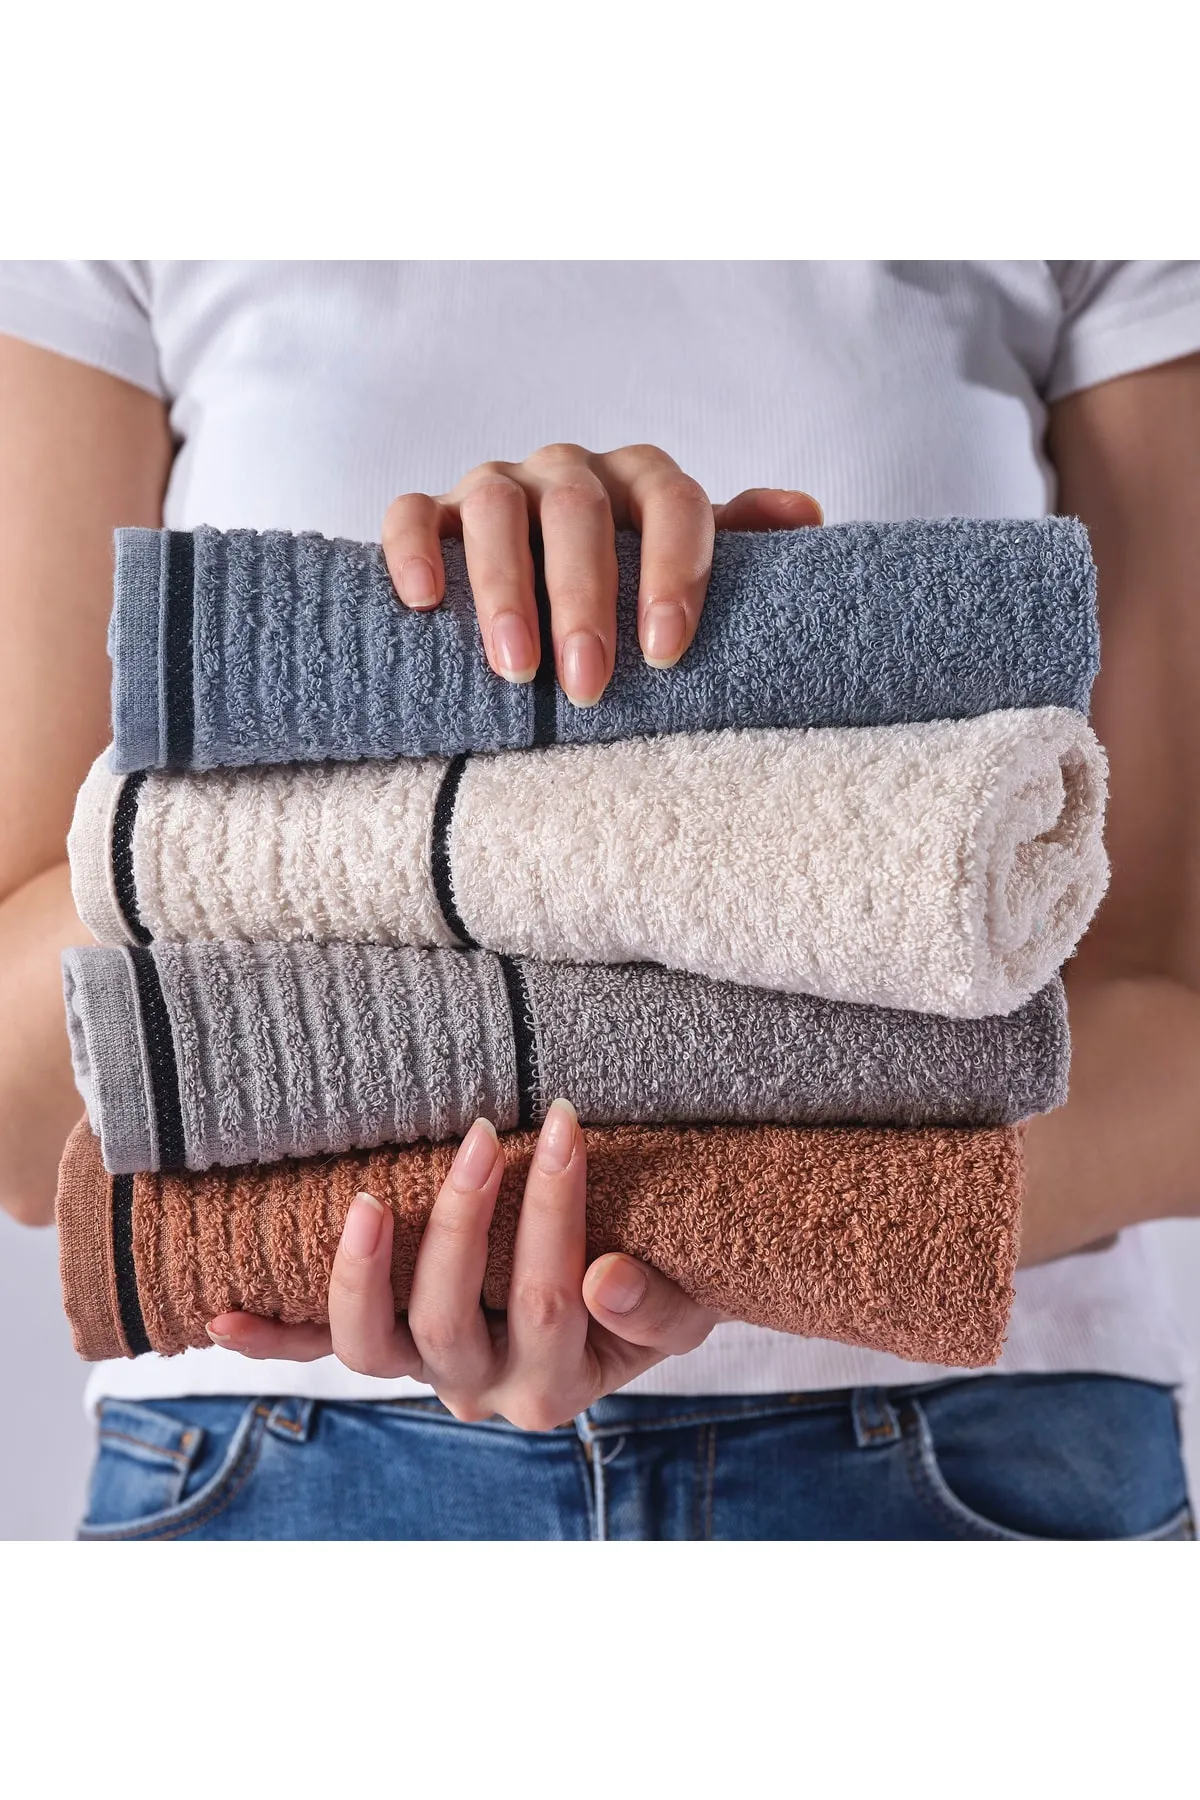 s Pinzon organic bath towels are soft and perfect